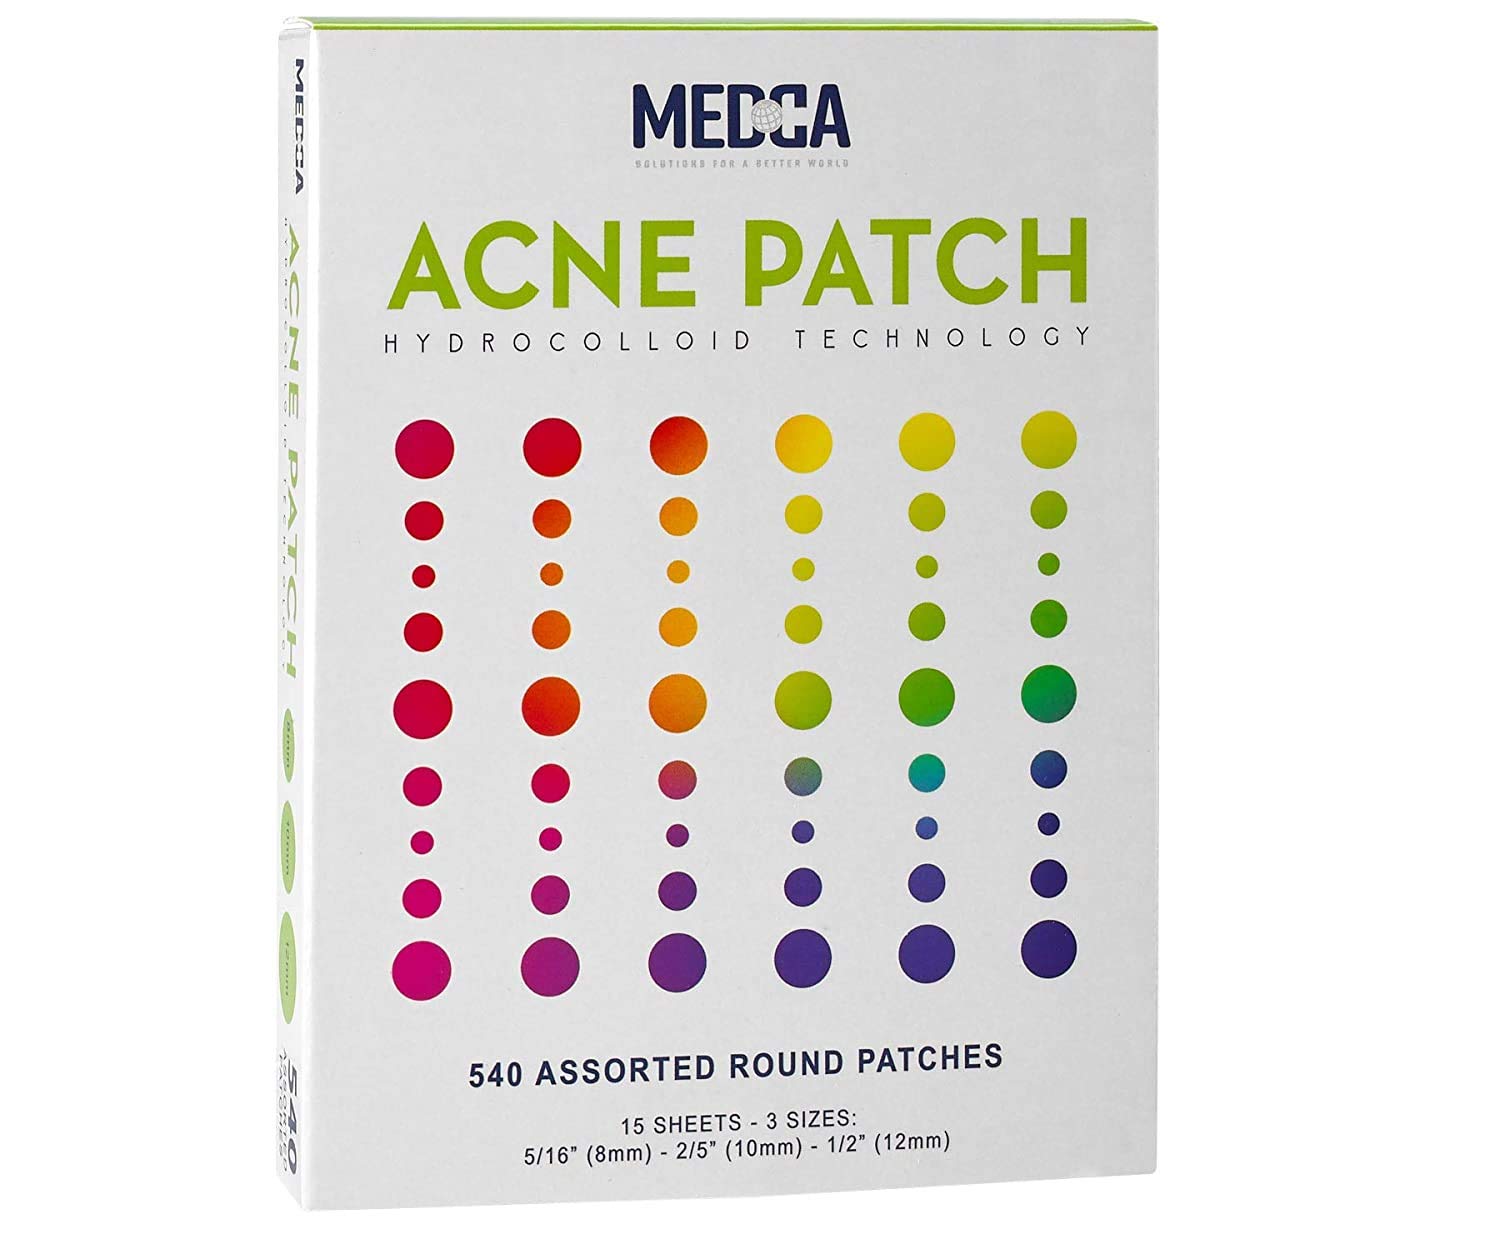 MEDca Acne Patches for Face - Hydrocolloid Bandages (540 Count) Zits, Acne, Pimple Patch in 3 Universal Sizes - image 3 of 8